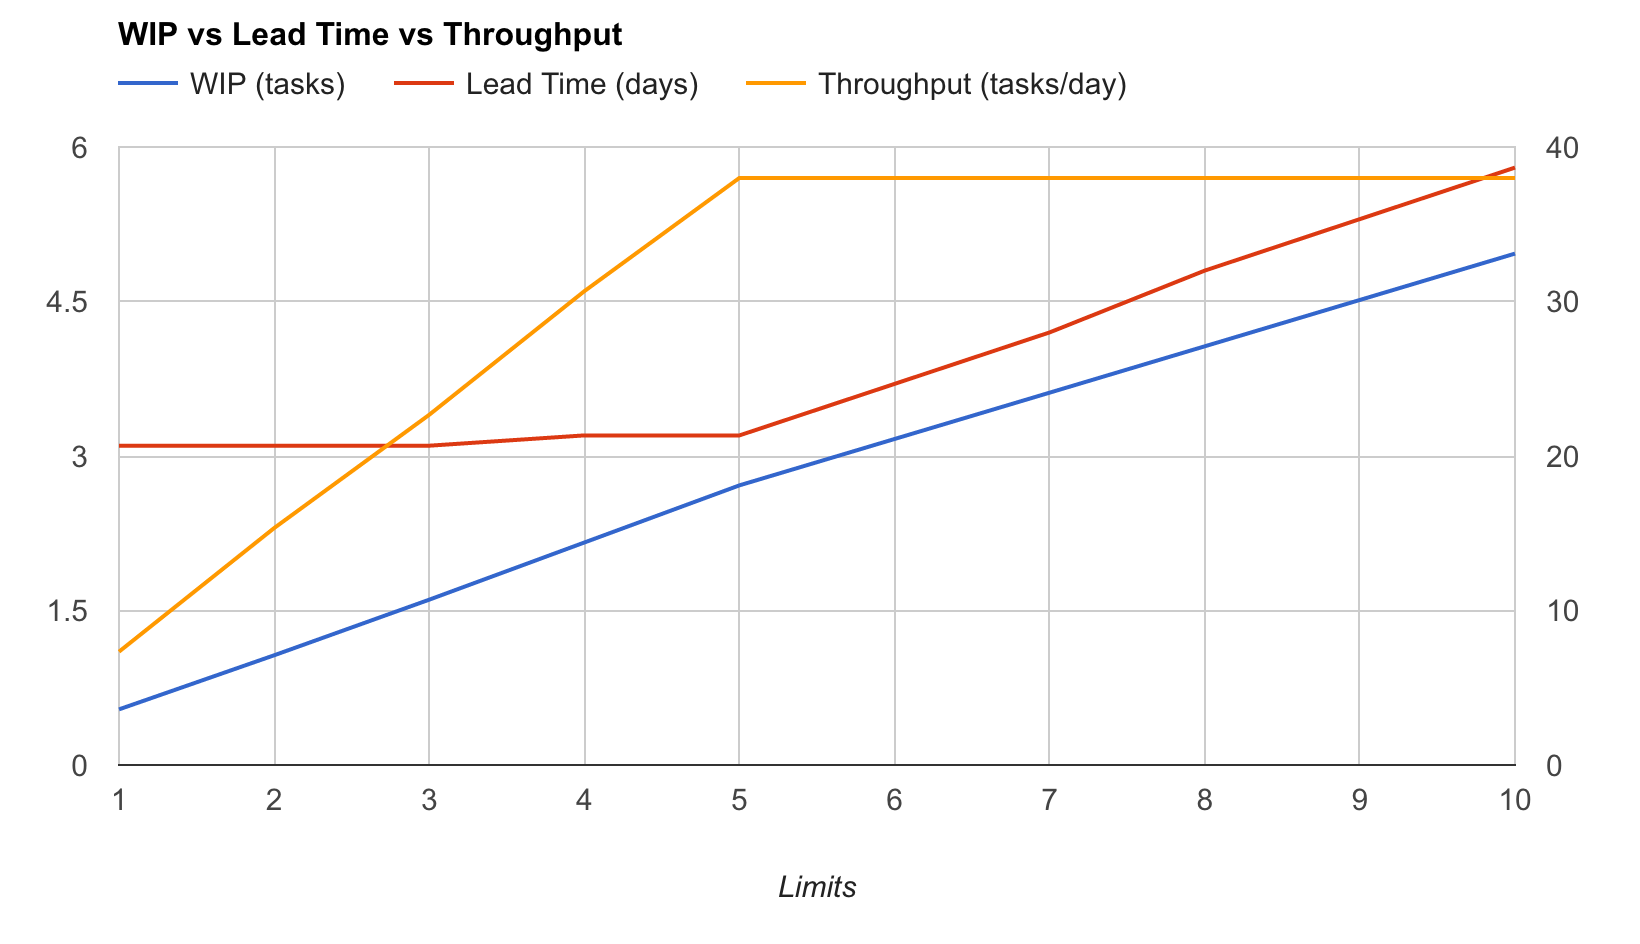 Lead Time, Throughput and WIP